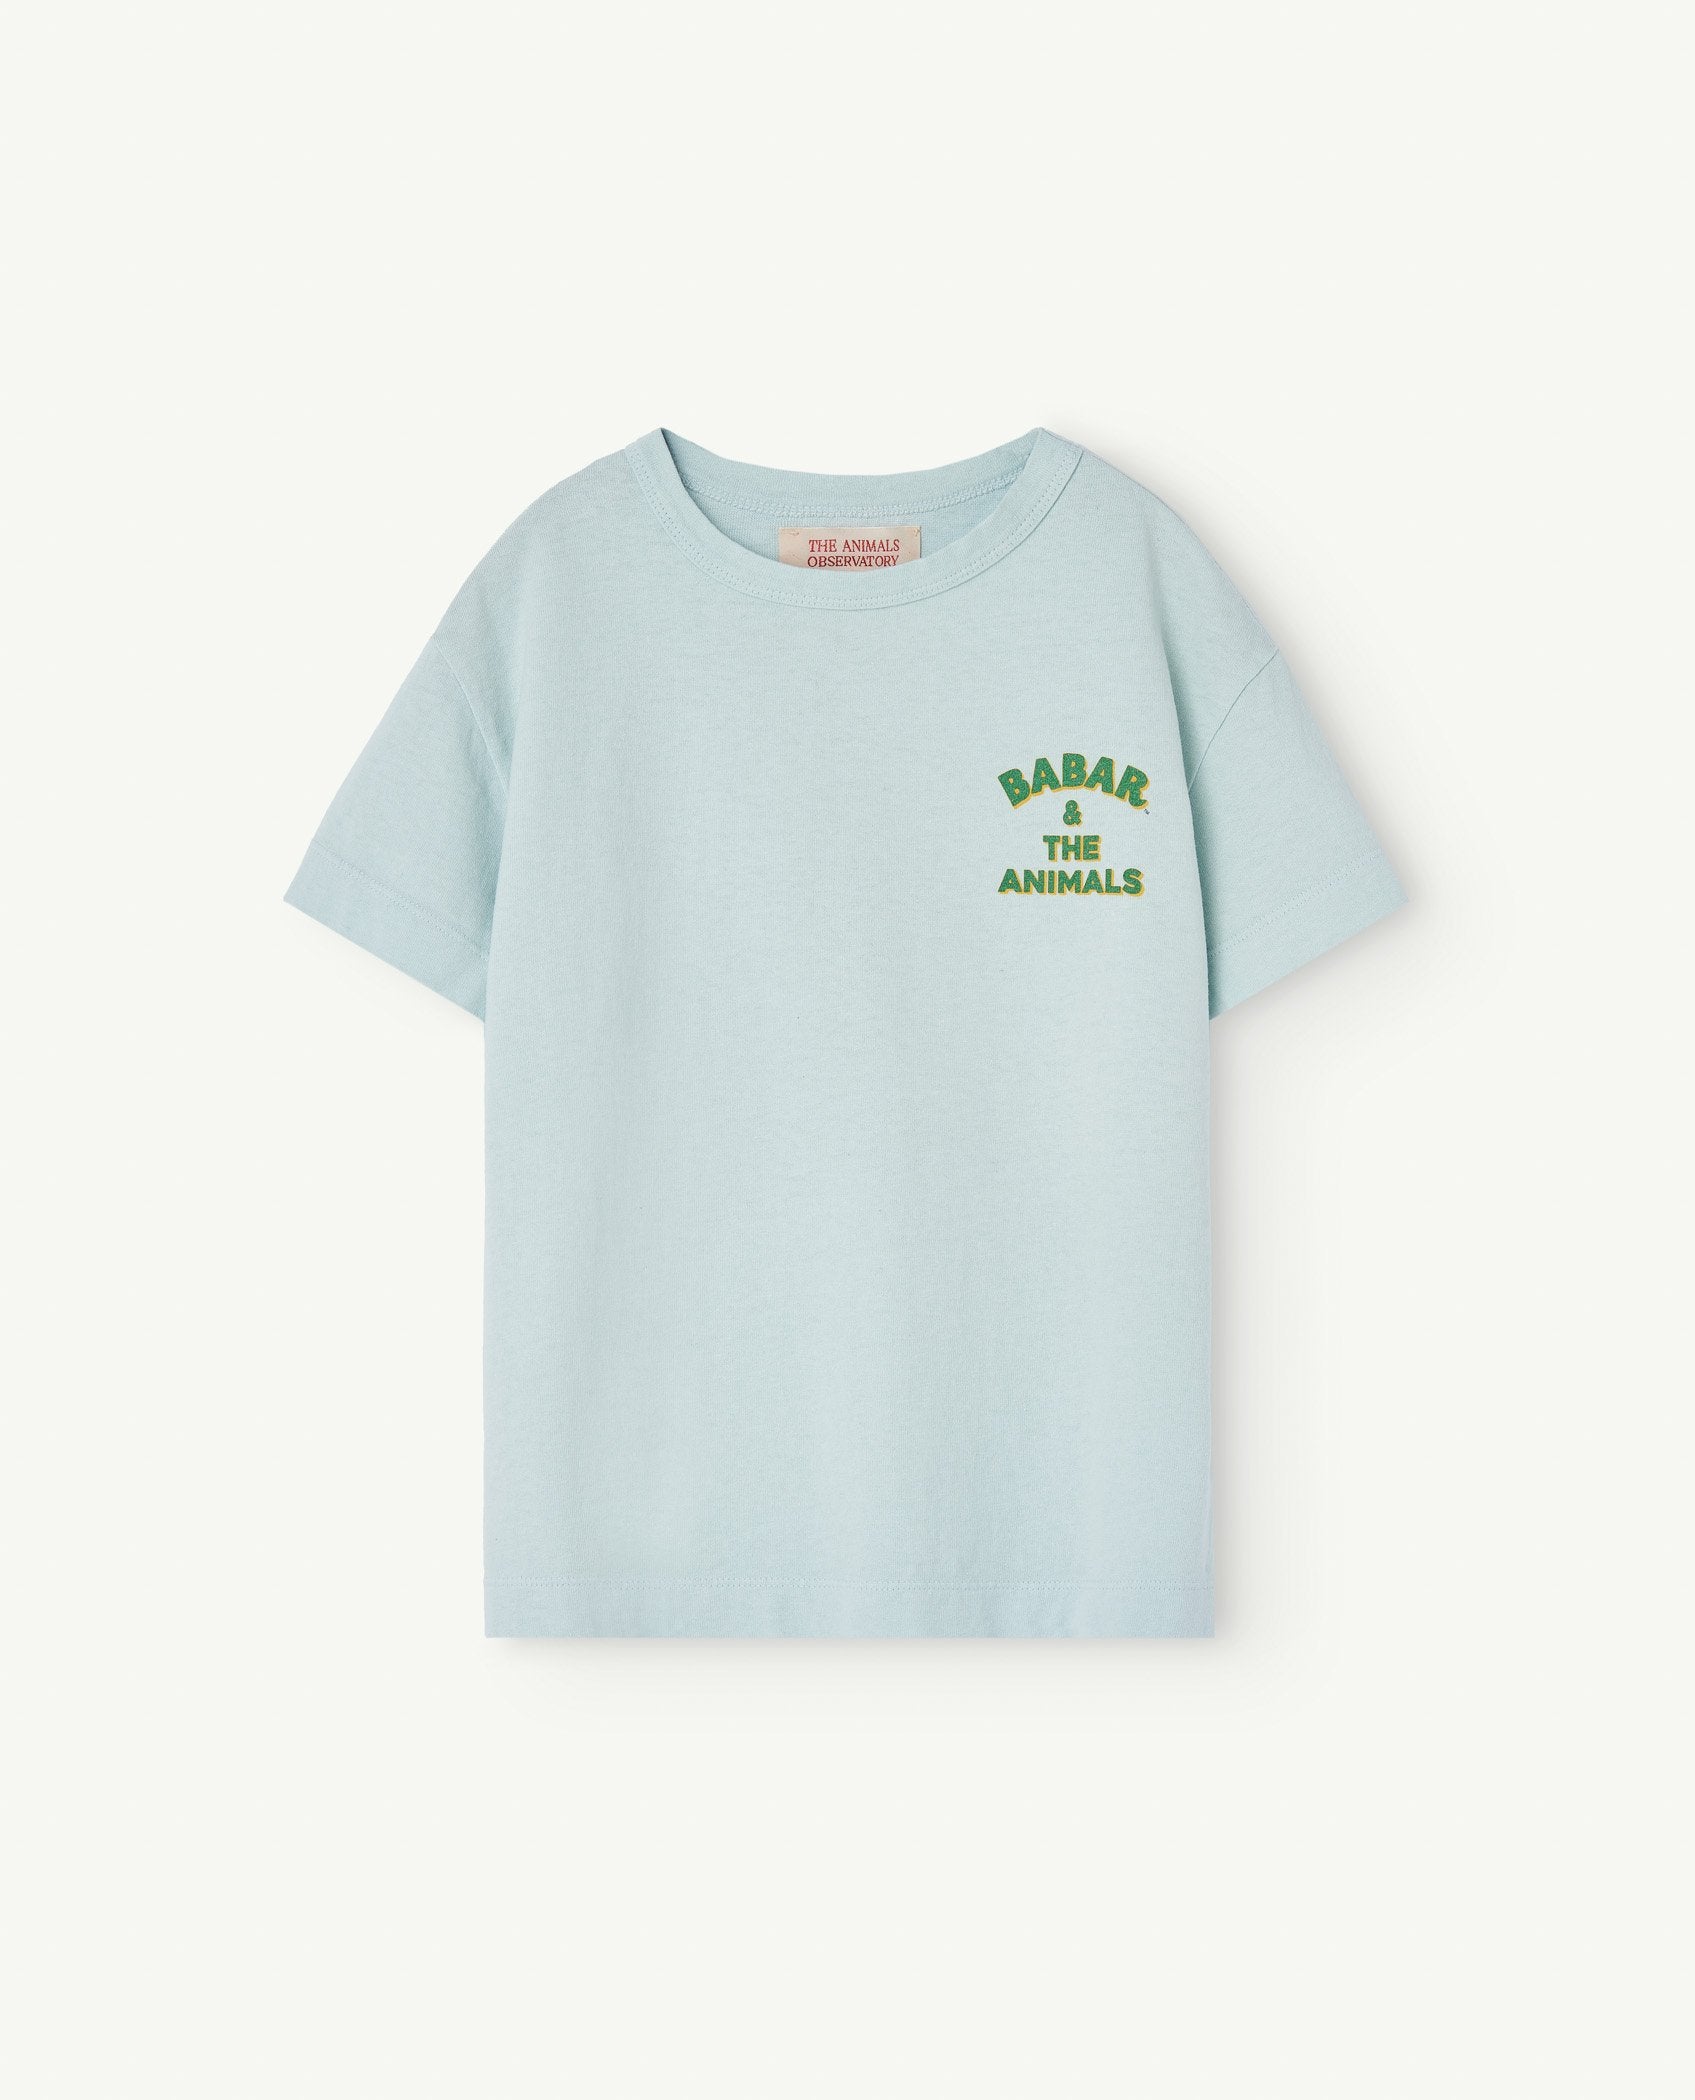 Babar Soft Blue Rooster T-Shirt PRODUCT FRONT